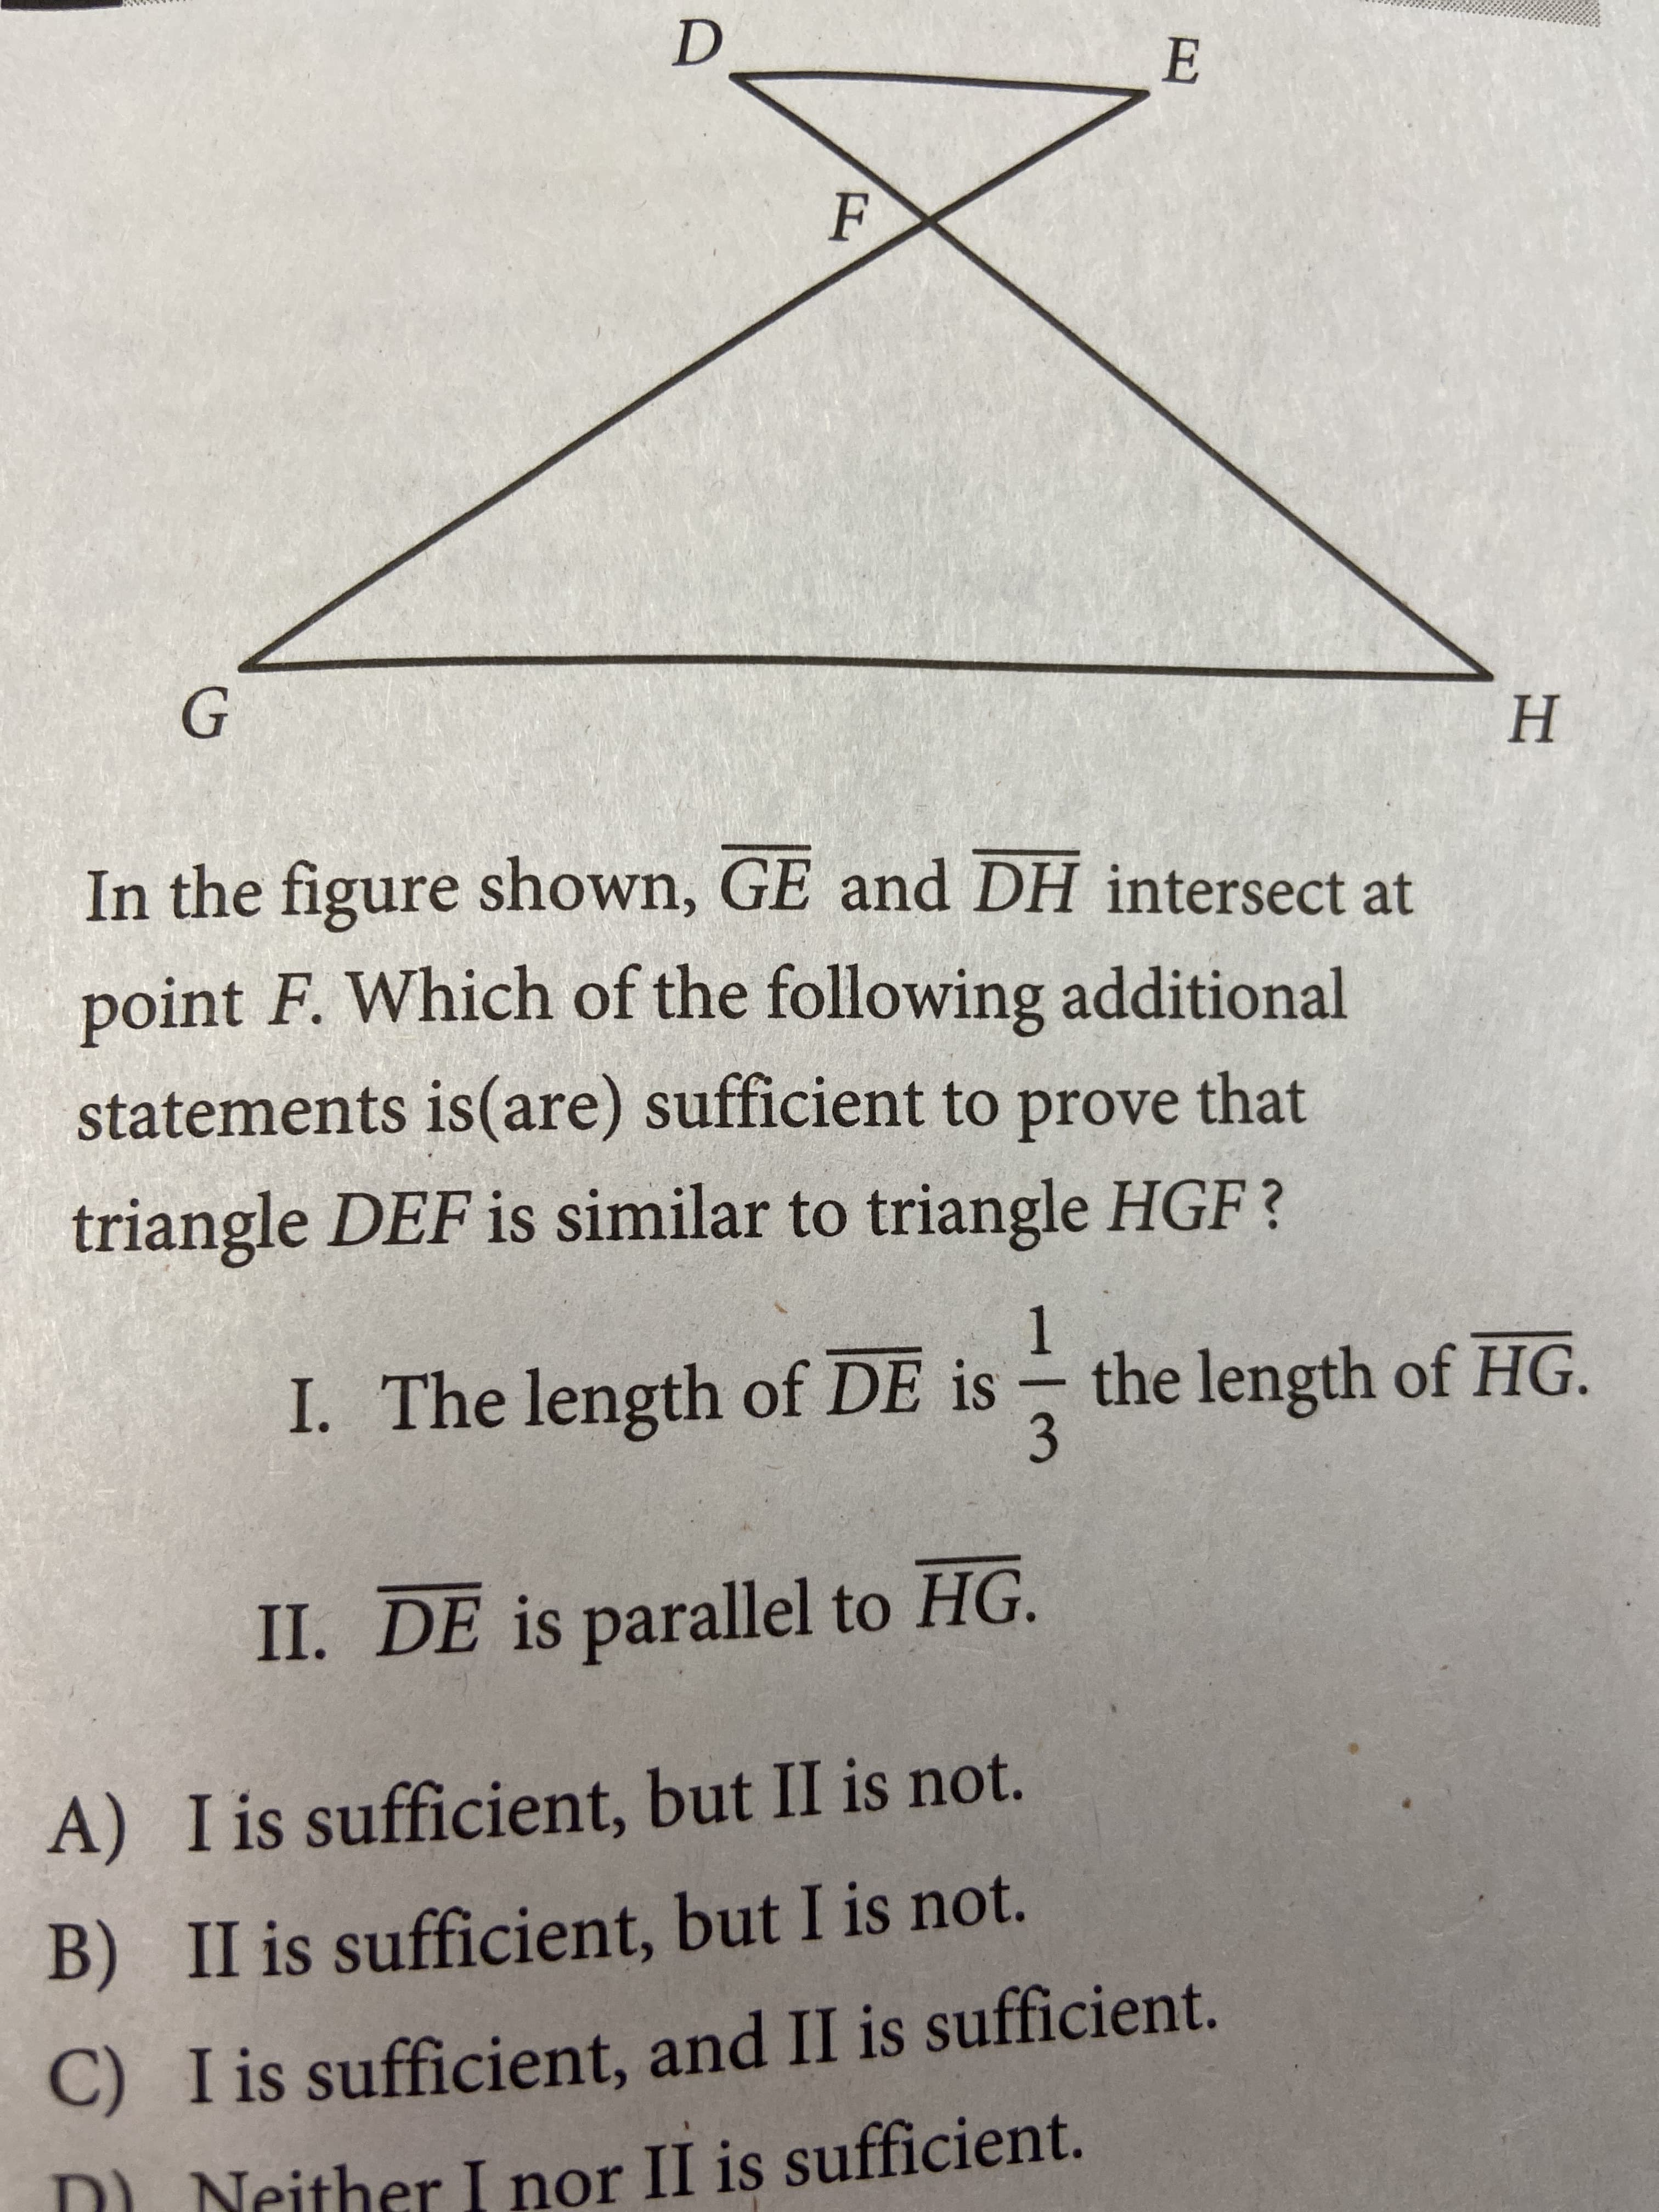 F
H.
In the figure
shown, GE and DH intersect at
point F. Which of the following additional
statements is(are) sufficient to prove that
triangle DEF is similar to triangle HGF?
I. The length of DE is
1.
the length of HG.
3.
II. DE is parallel to HG.
A) I is sufficient, but II is not.
B) II is sufficient, but I is not.
C) I is sufficient, and II is sufficient.
D Neither I nor II is sufficient.
